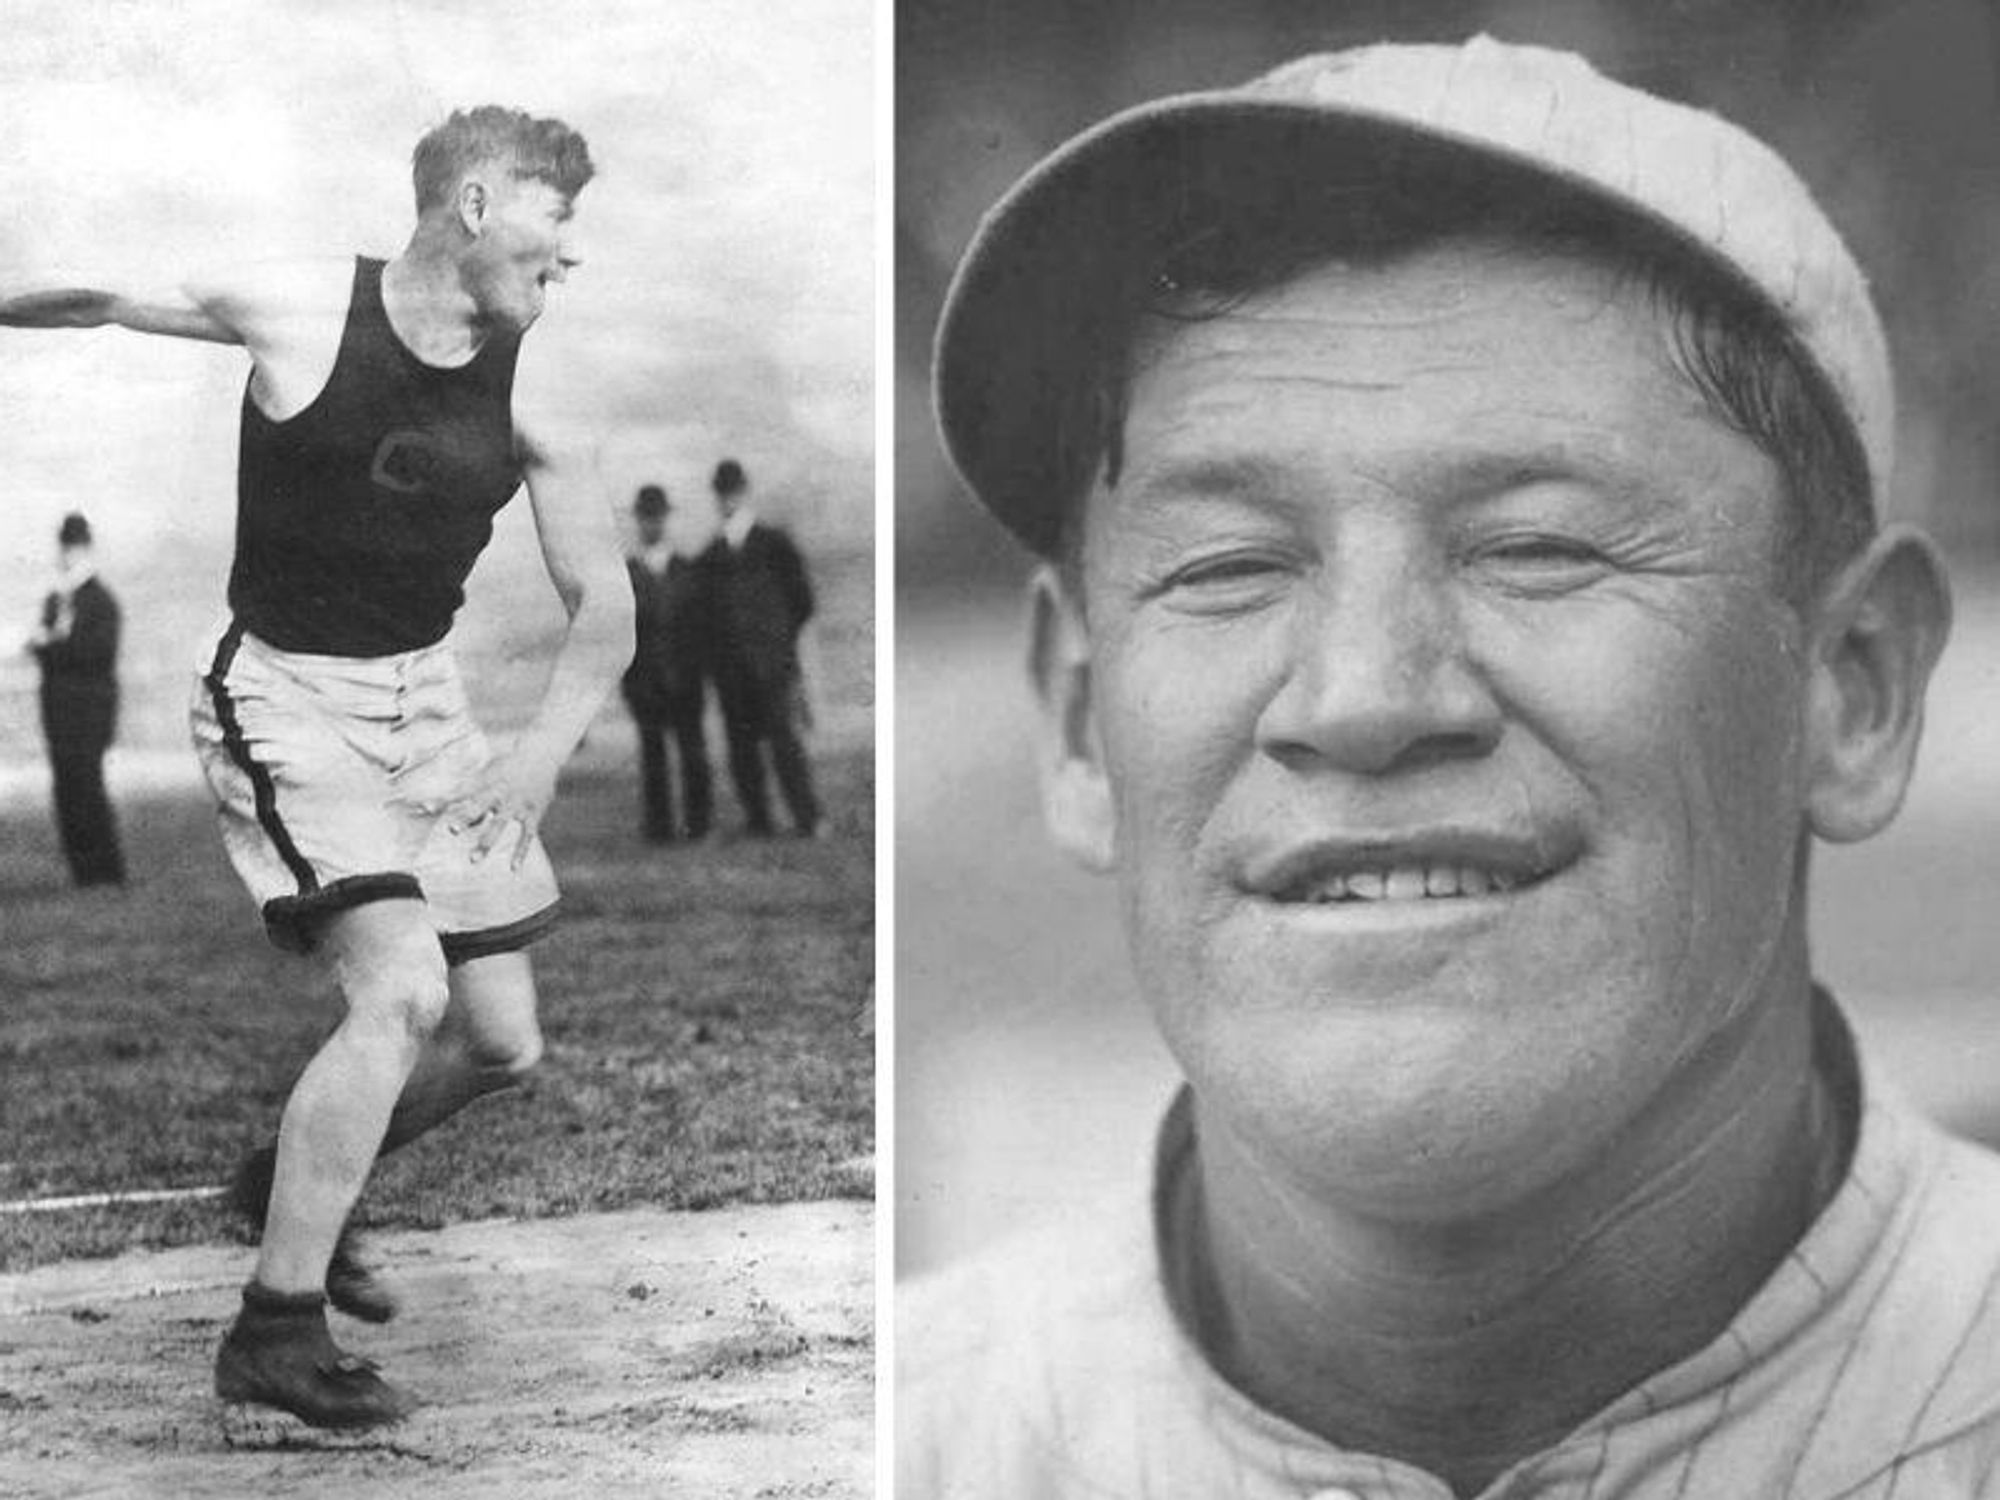 Jim Thorpe's gold medals officially reinstated after 110 years - Upworthy